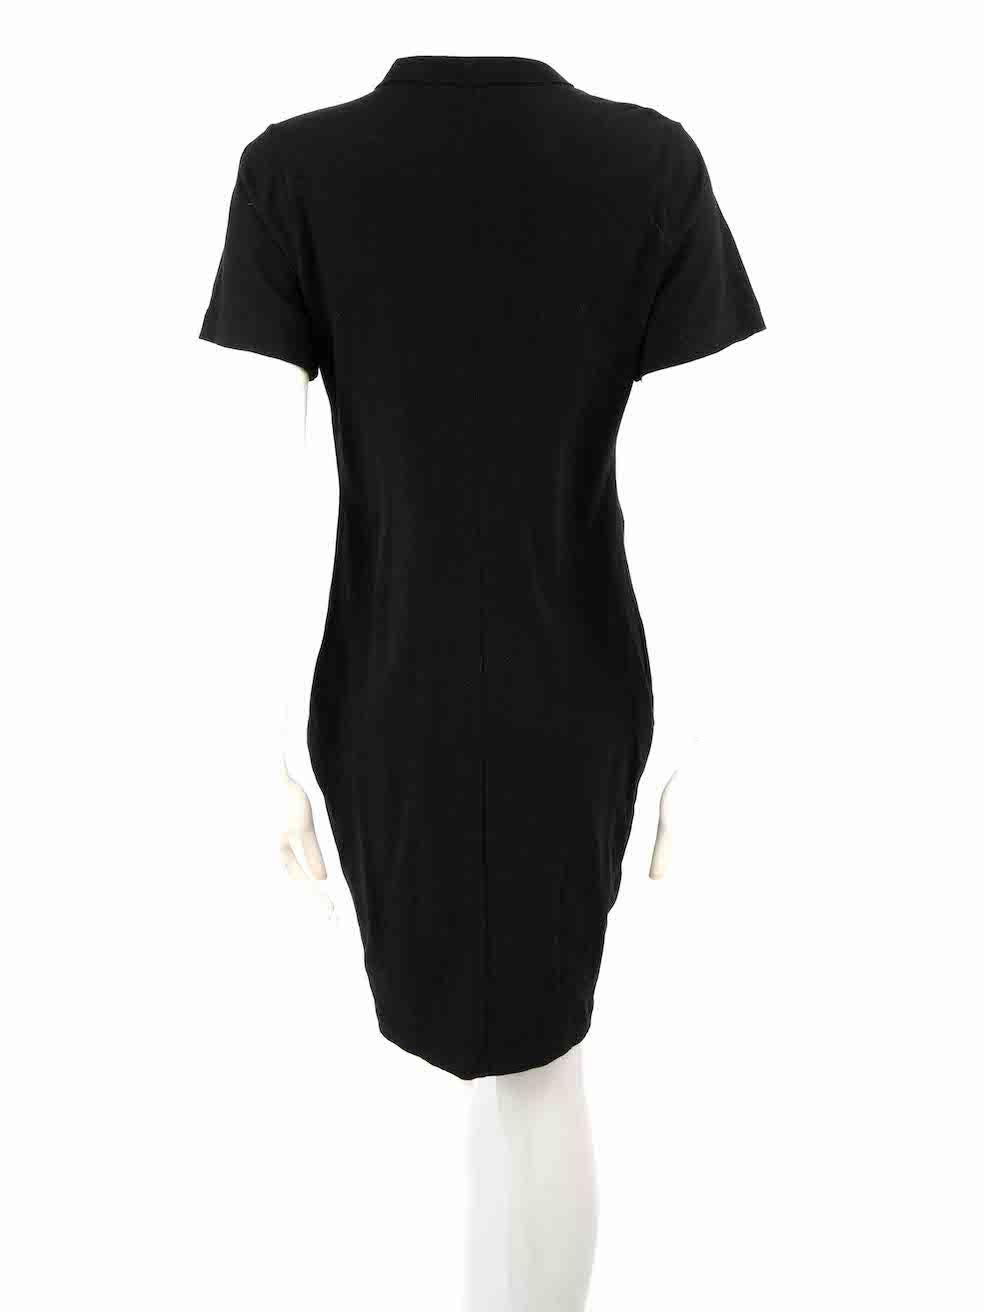 Alexander Wang Black Ruched Mini Dress Size M In Good Condition For Sale In London, GB